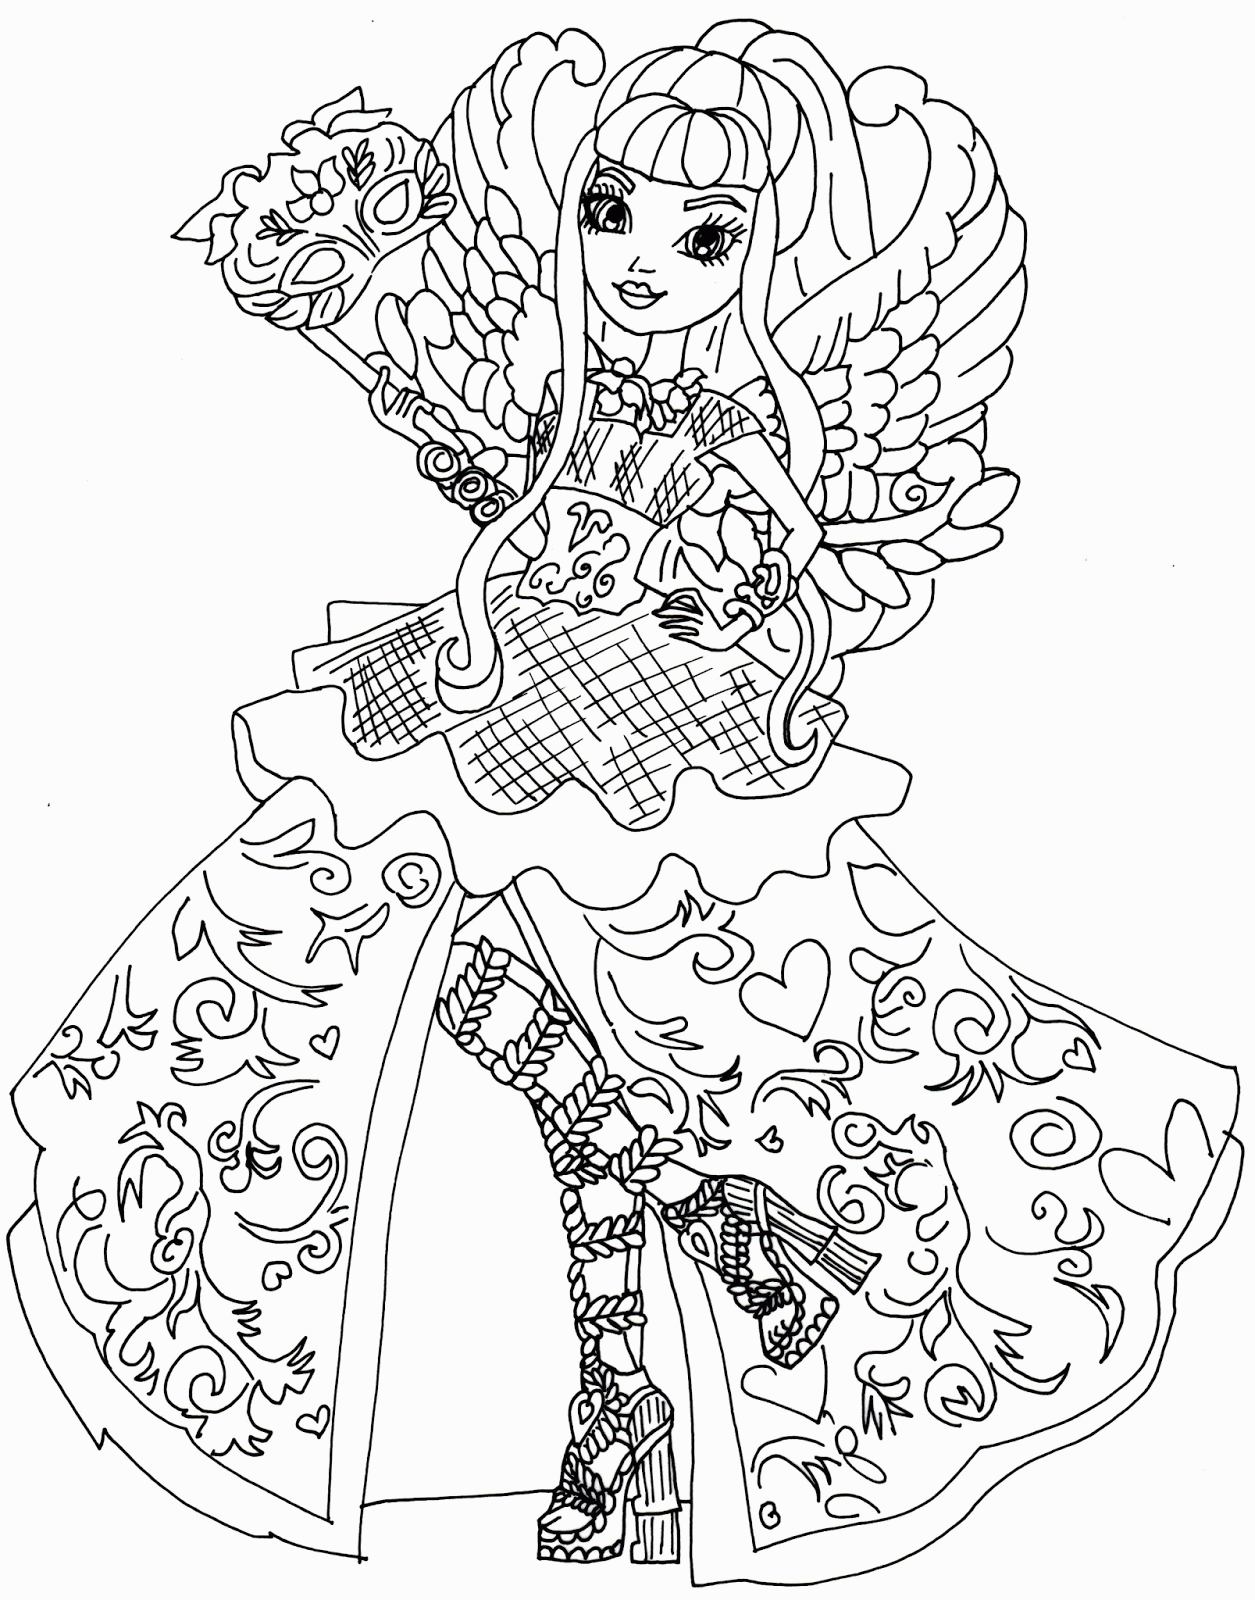 Free Printable Ever After High Coloring Pages: C.A Cupid